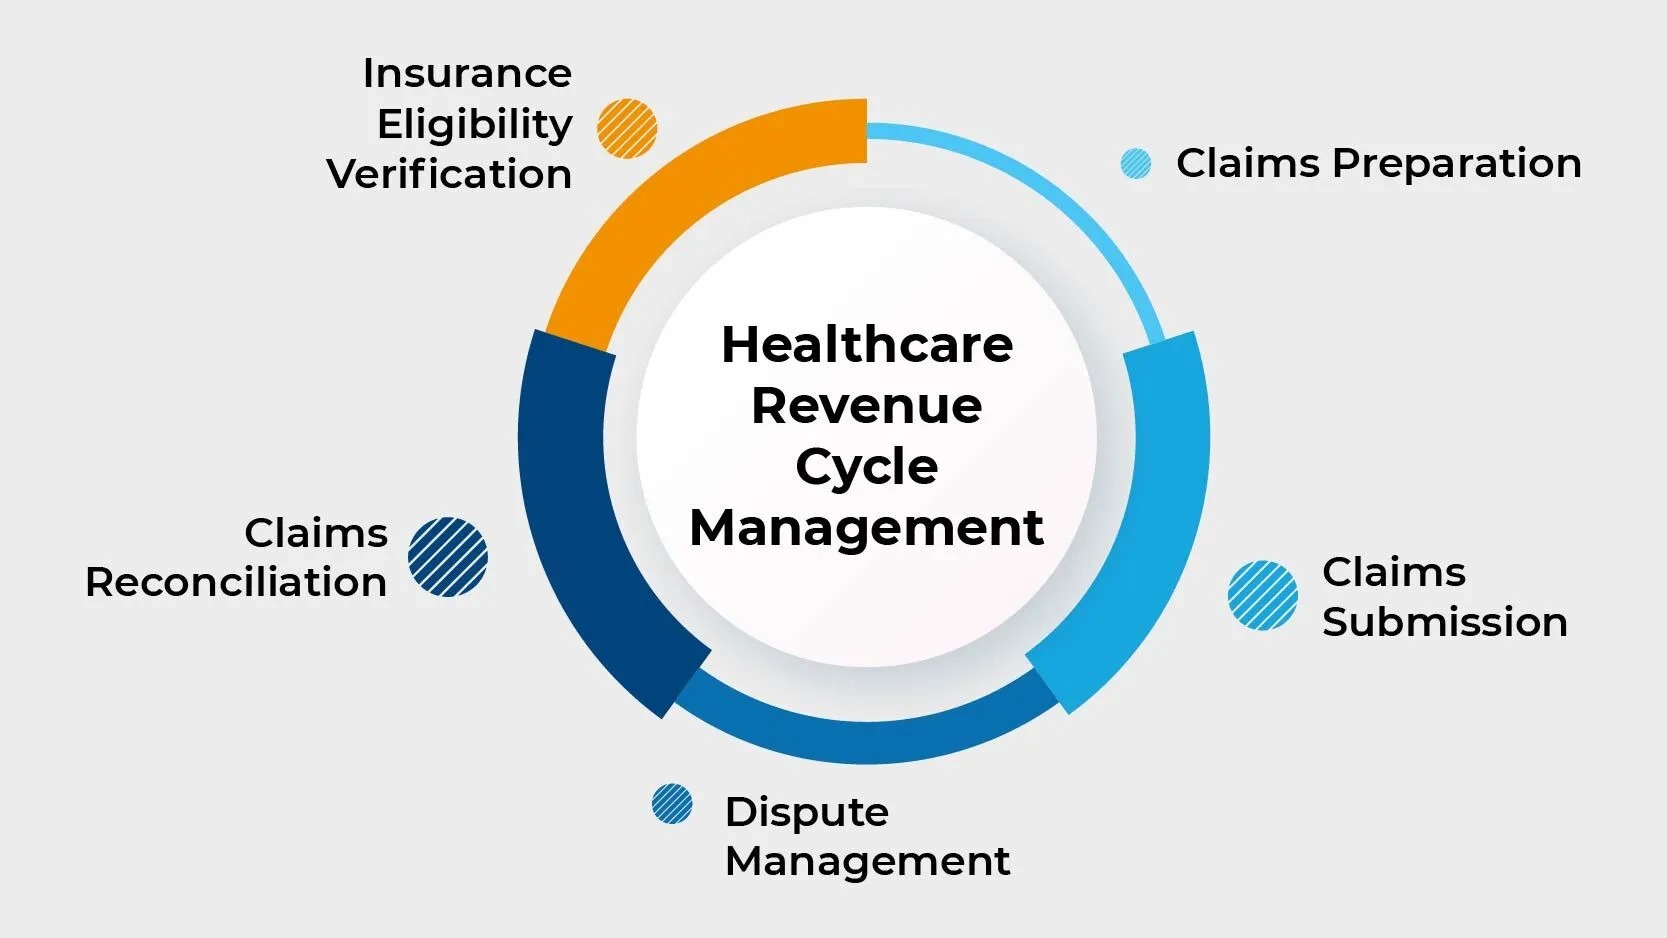 Verifying Insurance Is Part Of Which Revenue Cycle Step?